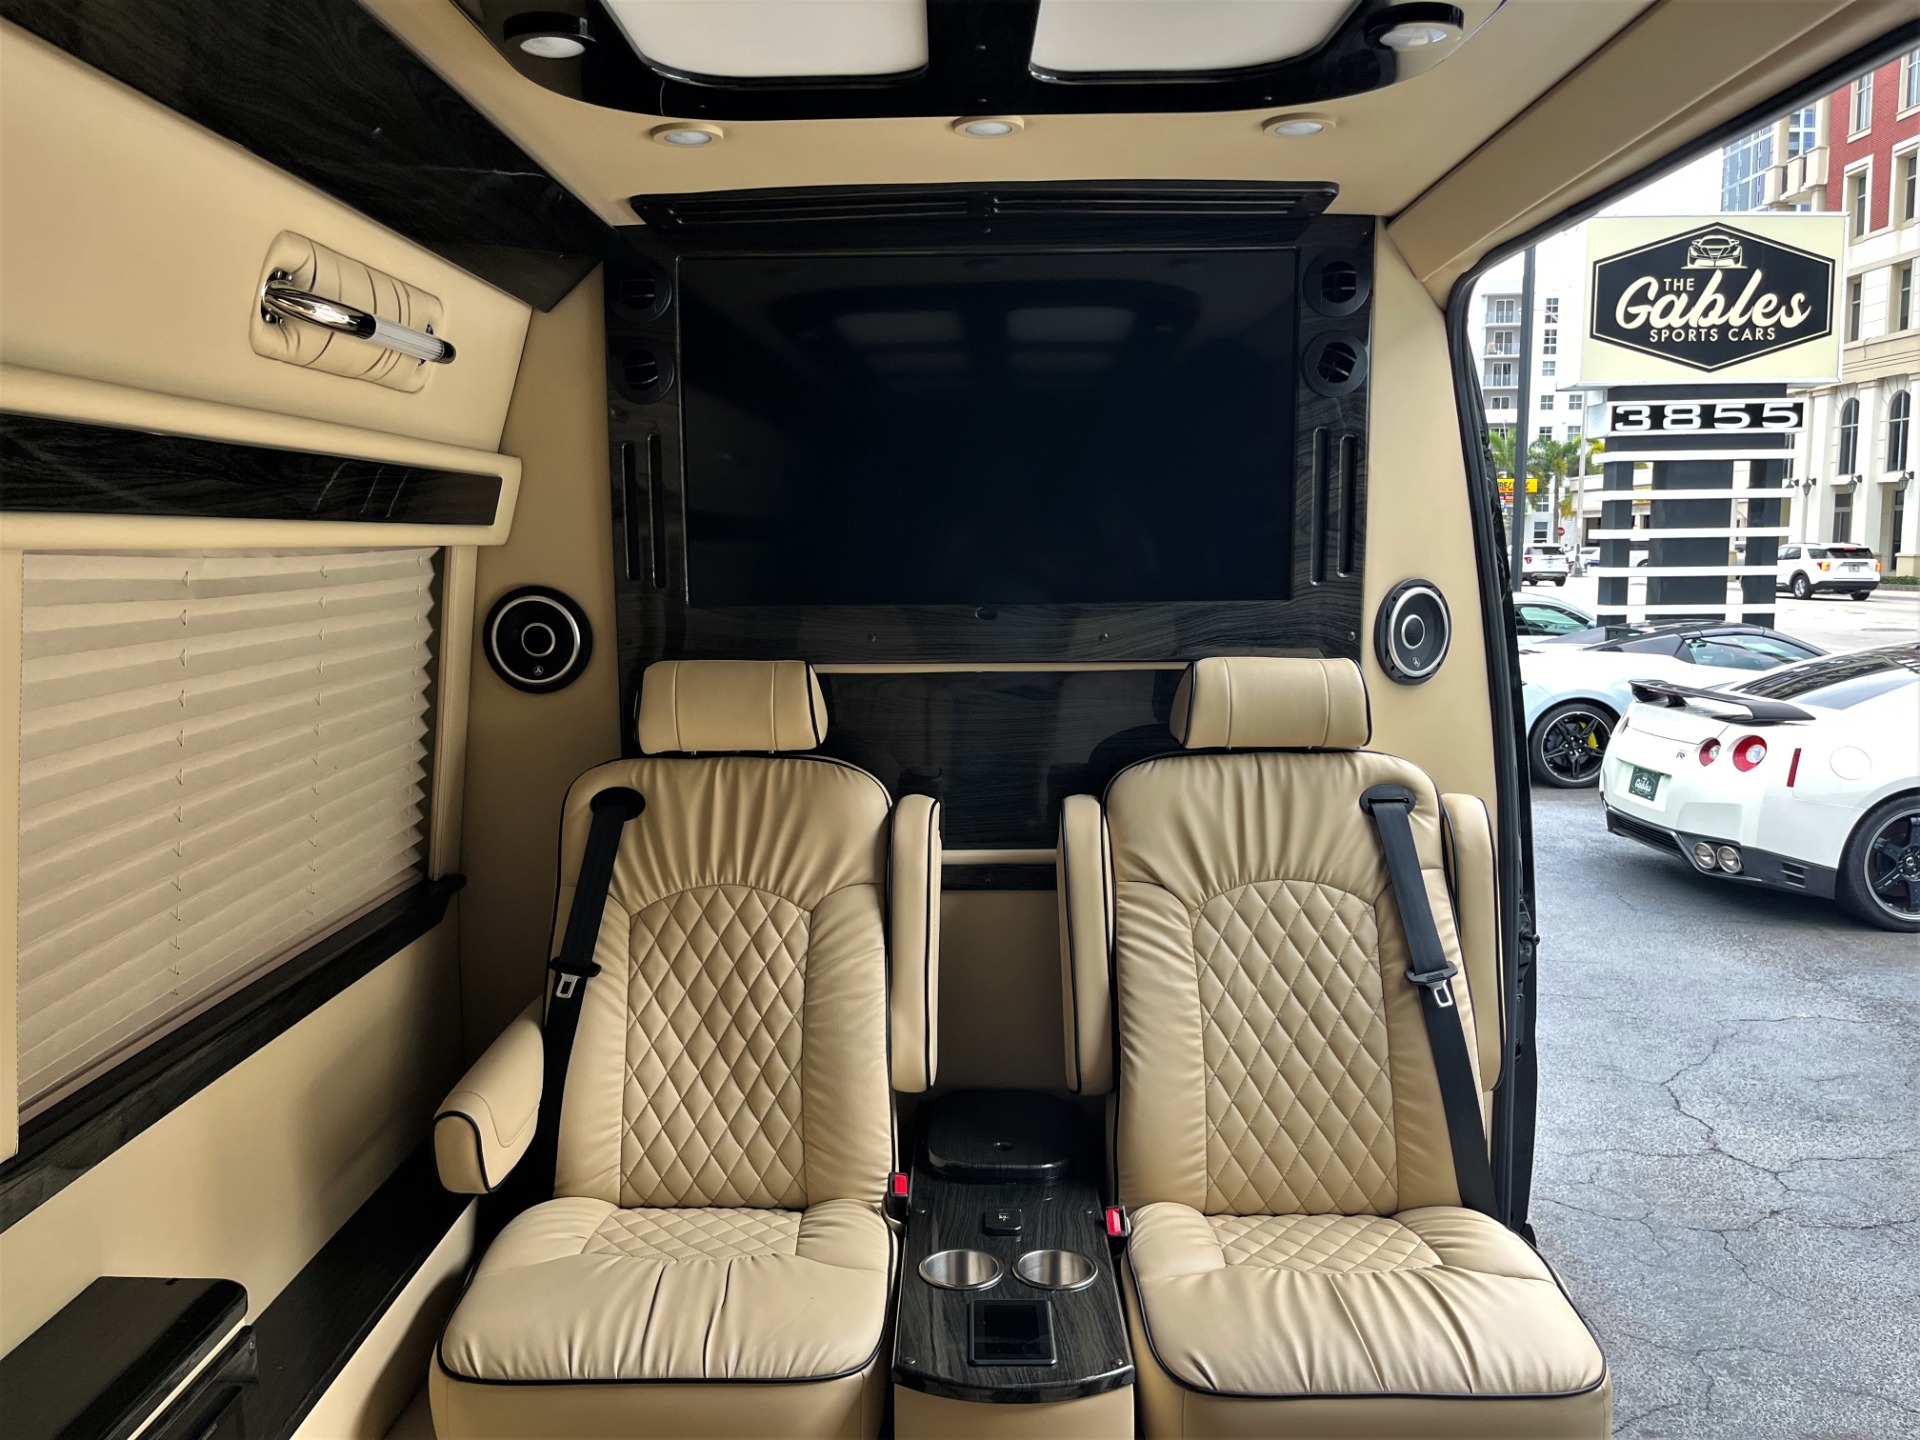 Used 2020 Mercedes-Benz Sprinter Cargo 3500 for sale $239,850 at The Gables Sports Cars in Miami FL 33146 3